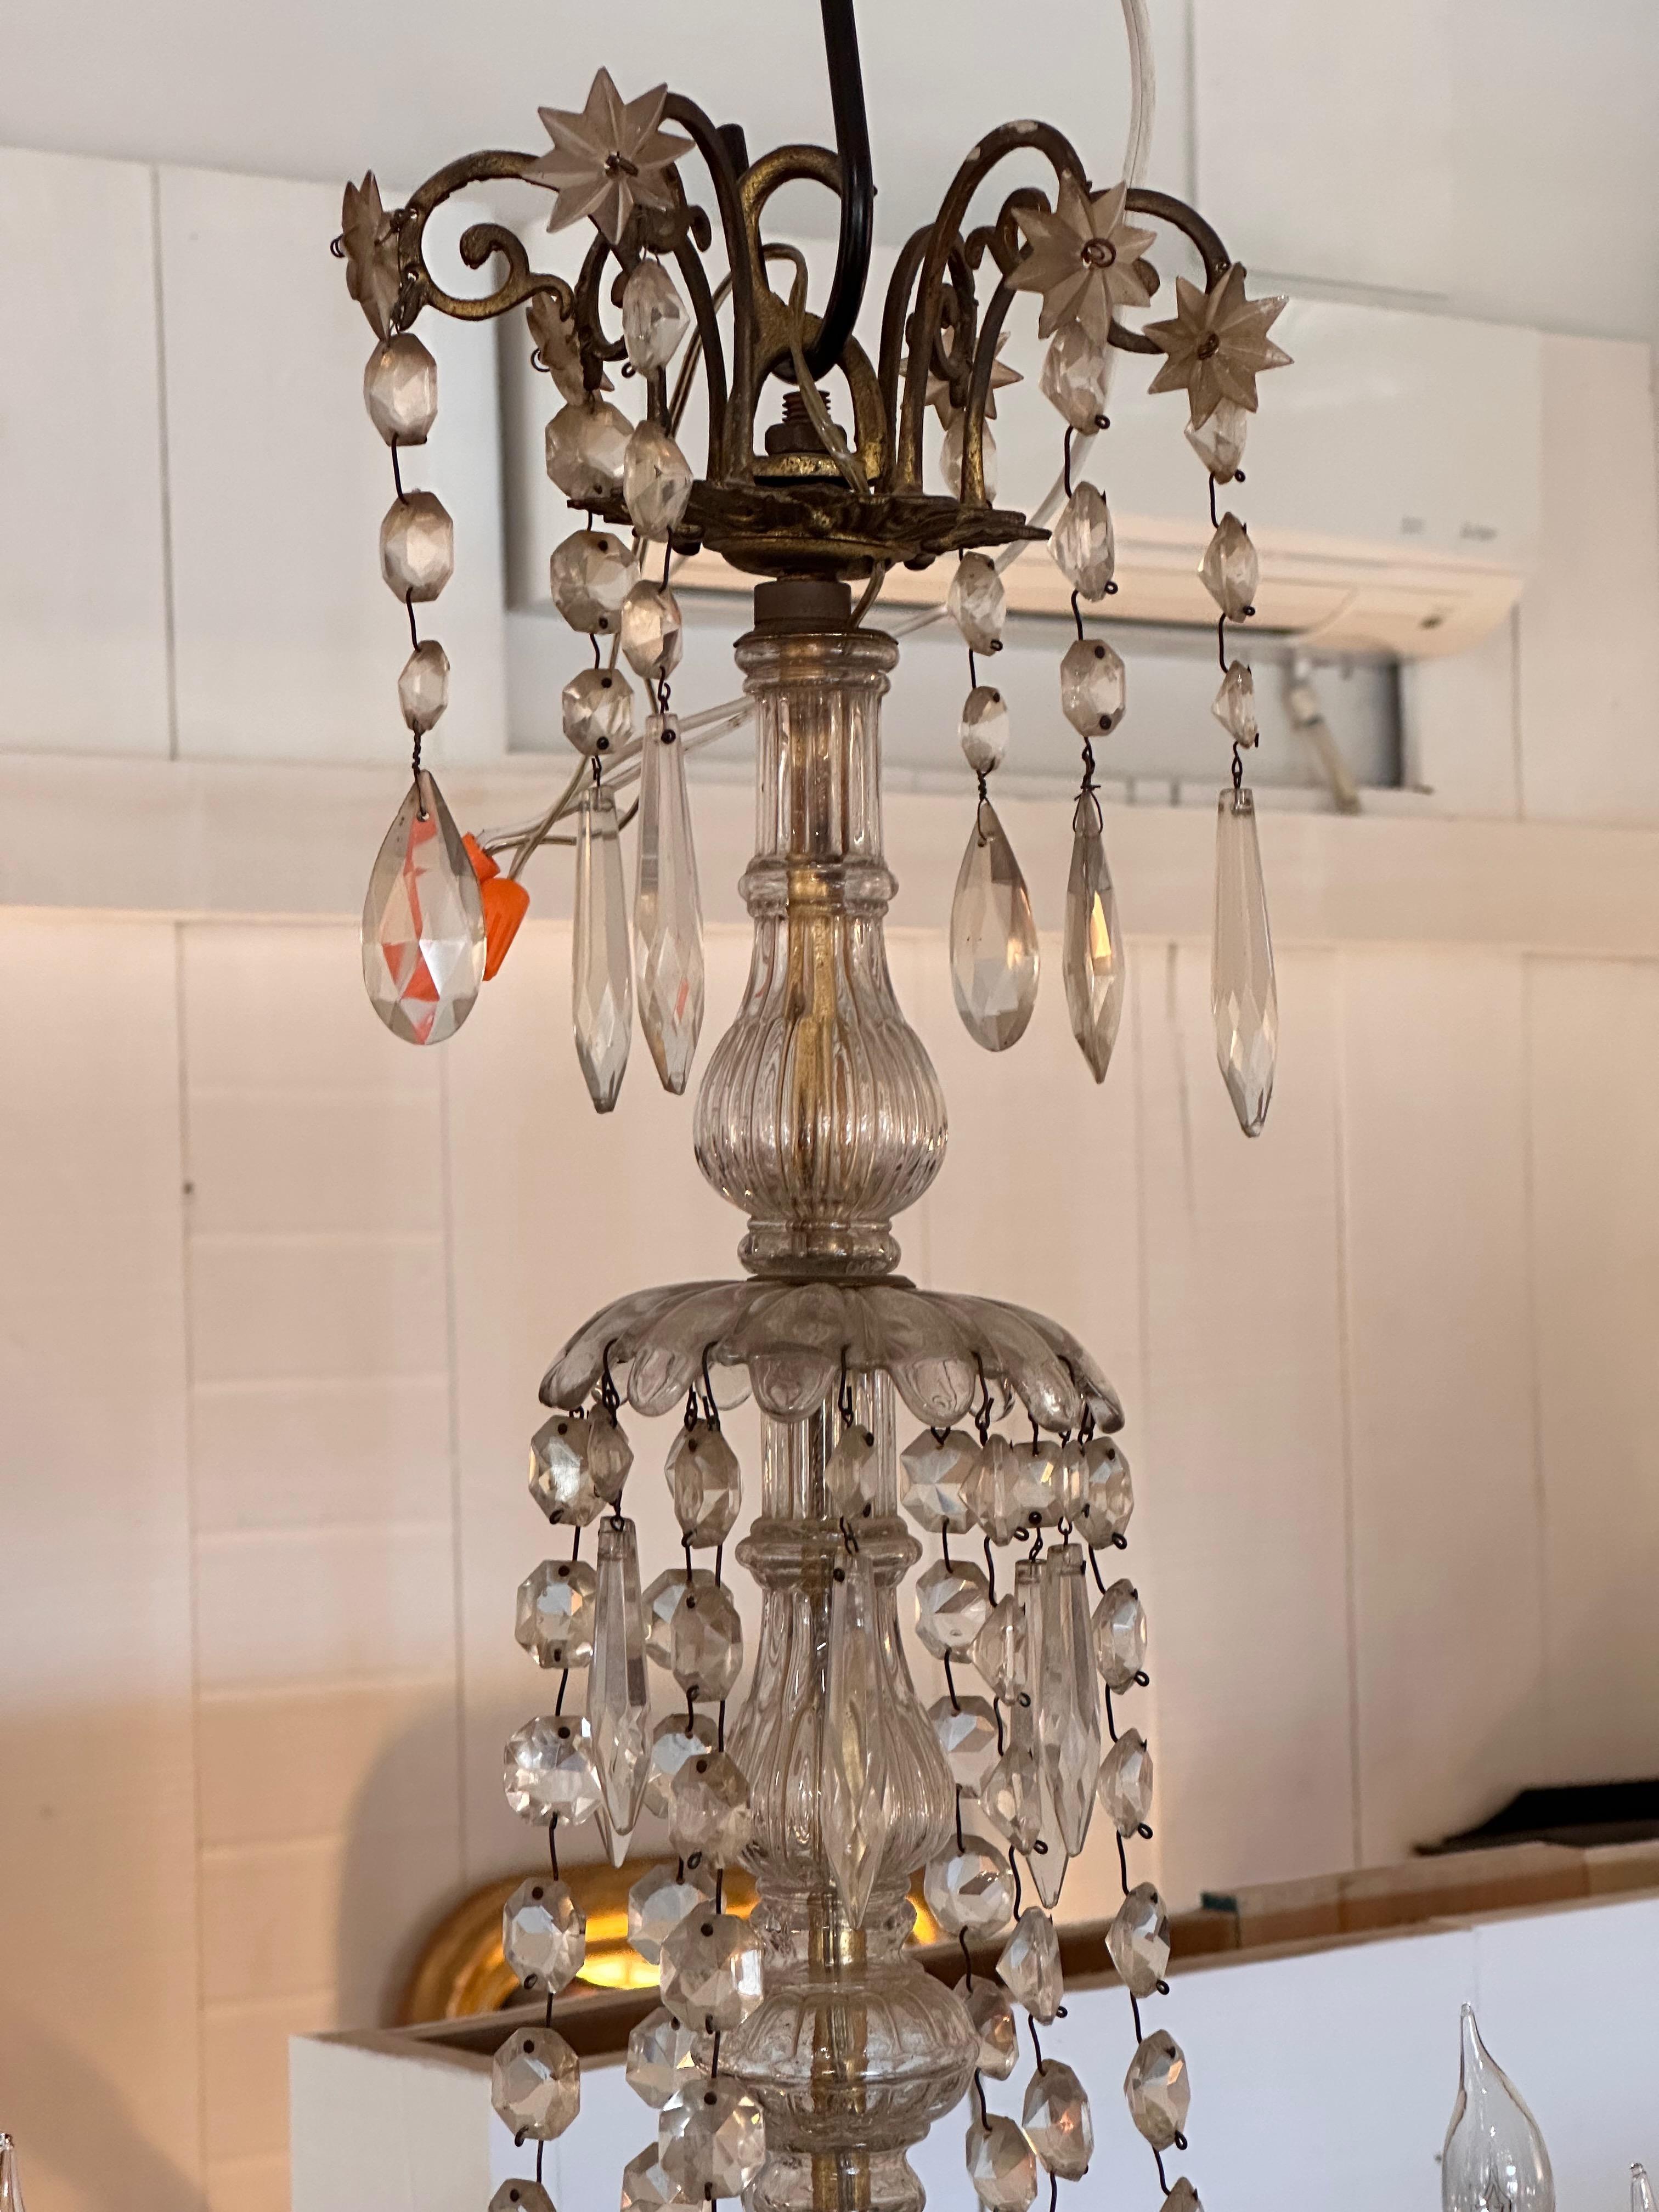 Lots of glam with this chandelier.
Dress up your room. Made in the 1920s.